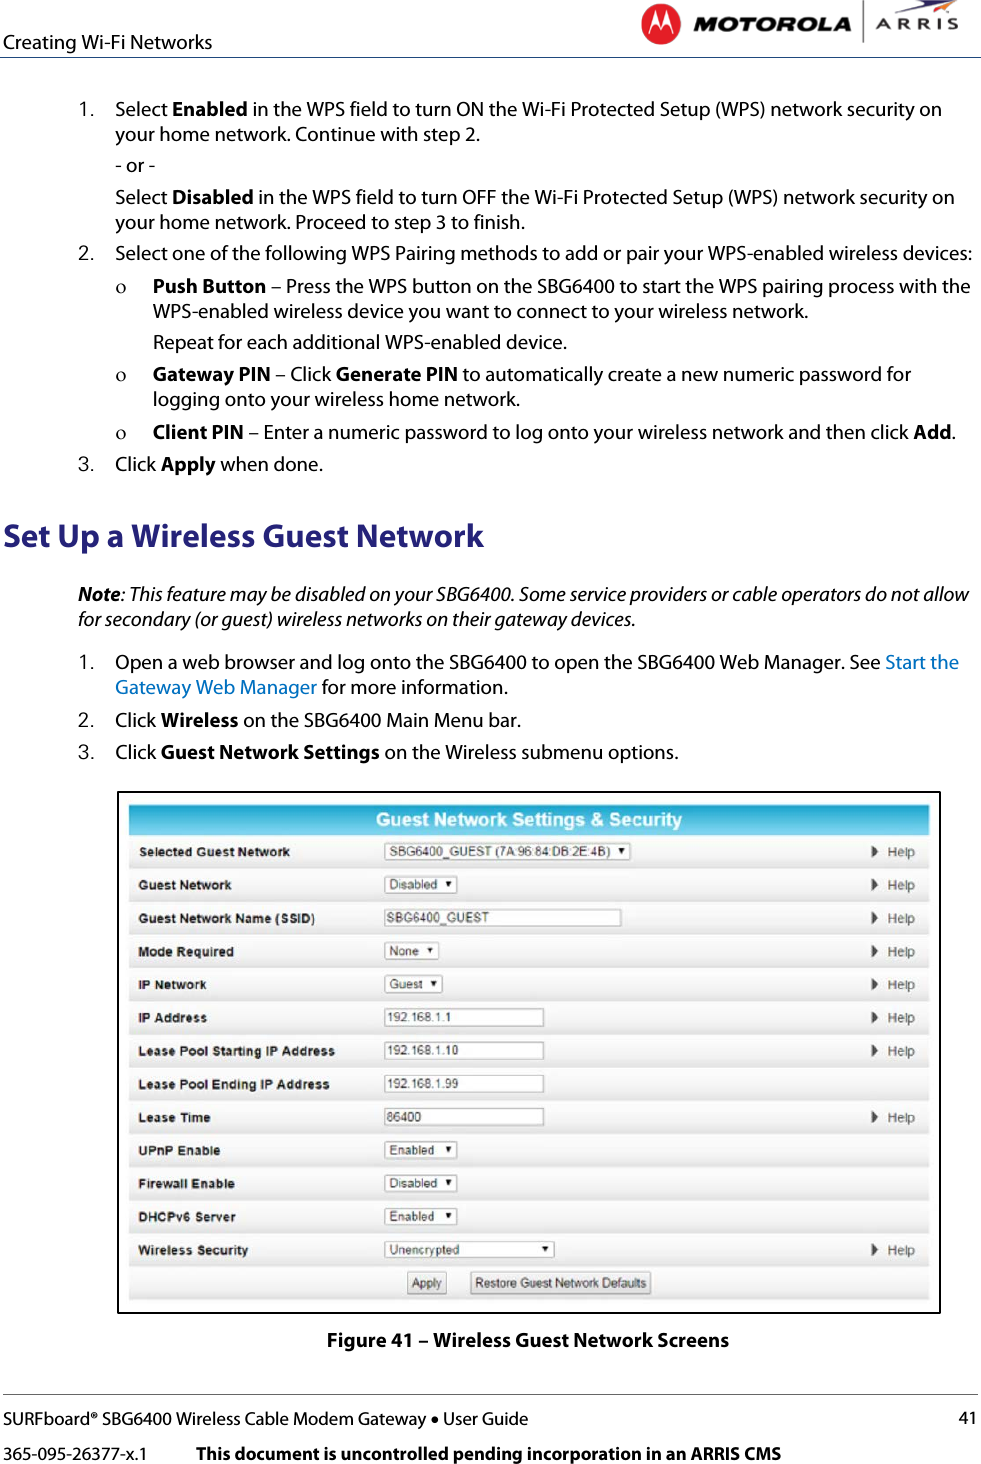 Creating Wi-Fi Networks   SURFboard® SBG6400 Wireless Cable Modem Gateway • User Guide 41 365-095-26377-x.1            This document is uncontrolled pending incorporation in an ARRIS CMS  1. Select Enabled in the WPS field to turn ON the Wi-Fi Protected Setup (WPS) network security on your home network. Continue with step 2. - or - Select Disabled in the WPS field to turn OFF the Wi-Fi Protected Setup (WPS) network security on your home network. Proceed to step 3 to finish. 2. Select one of the following WPS Pairing methods to add or pair your WPS-enabled wireless devices: ο Push Button – Press the WPS button on the SBG6400 to start the WPS pairing process with the WPS-enabled wireless device you want to connect to your wireless network.  Repeat for each additional WPS-enabled device. ο Gateway PIN – Click Generate PIN to automatically create a new numeric password for logging onto your wireless home network. ο Client PIN – Enter a numeric password to log onto your wireless network and then click Add. 3. Click Apply when done. Set Up a Wireless Guest Network Note: This feature may be disabled on your SBG6400. Some service providers or cable operators do not allow for secondary (or guest) wireless networks on their gateway devices. 1. Open a web browser and log onto the SBG6400 to open the SBG6400 Web Manager. See Start the Gateway Web Manager for more information. 2. Click Wireless on the SBG6400 Main Menu bar. 3. Click Guest Network Settings on the Wireless submenu options.  Figure 41 – Wireless Guest Network Screens 